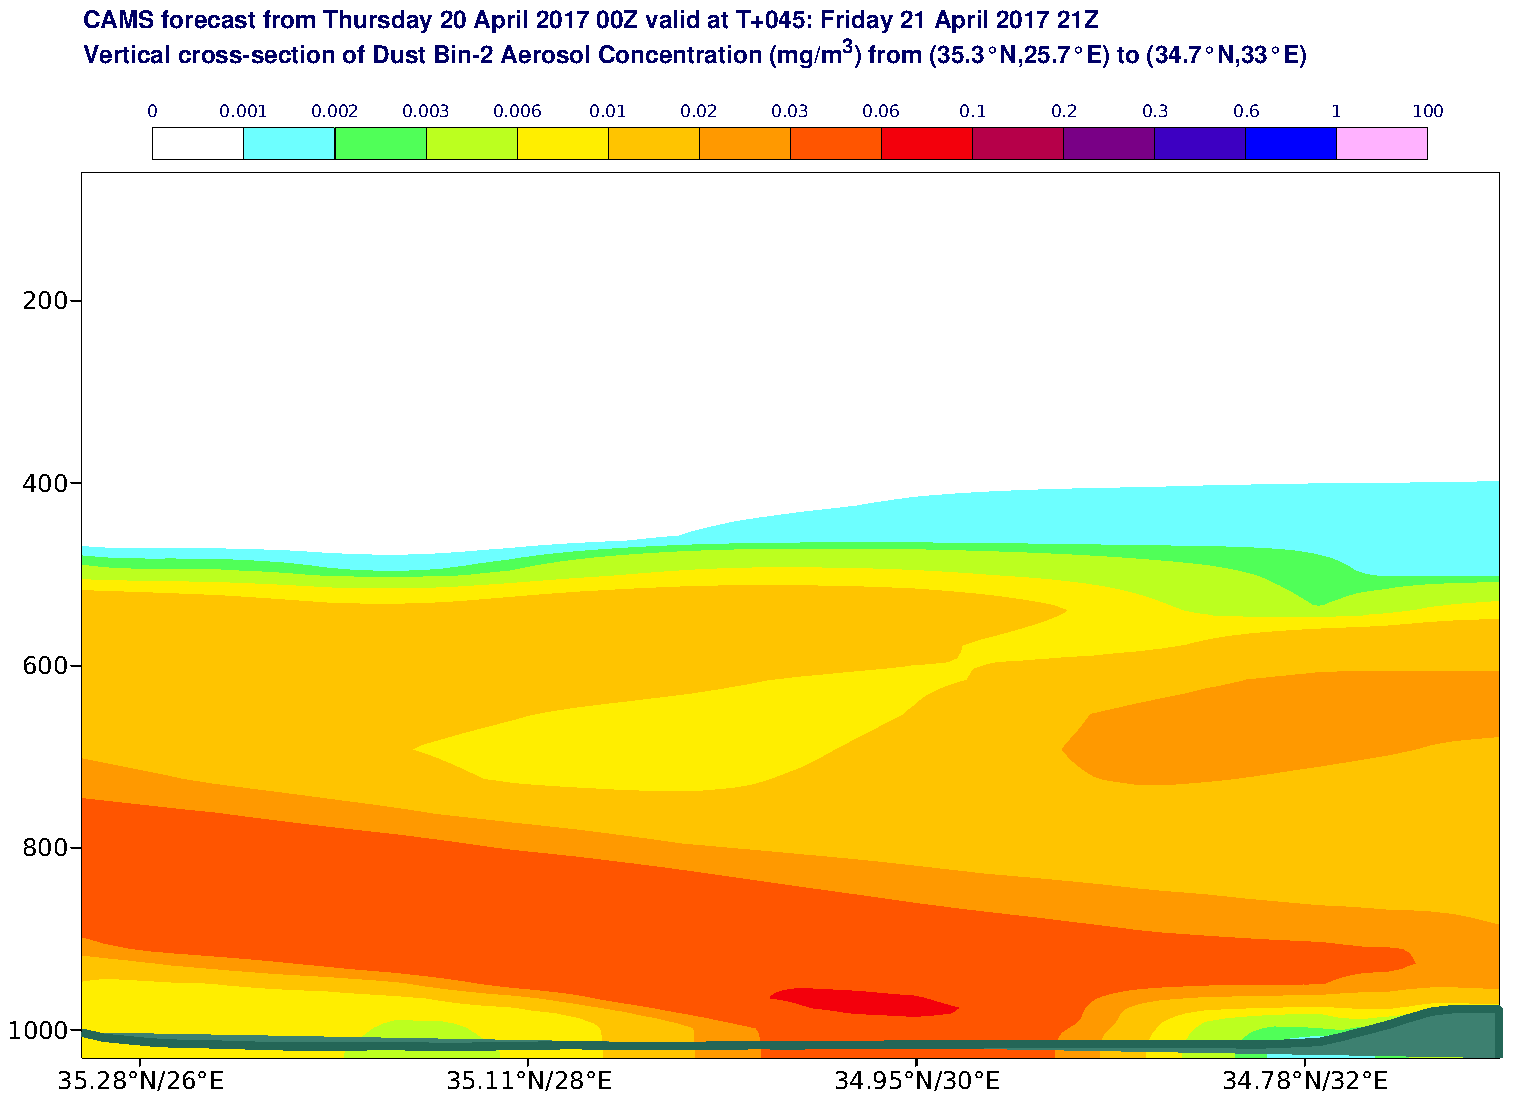 Vertical cross-section of Dust Bin-2 Aerosol Concentration (mg/m3) valid at T45 - 2017-04-21 21:00